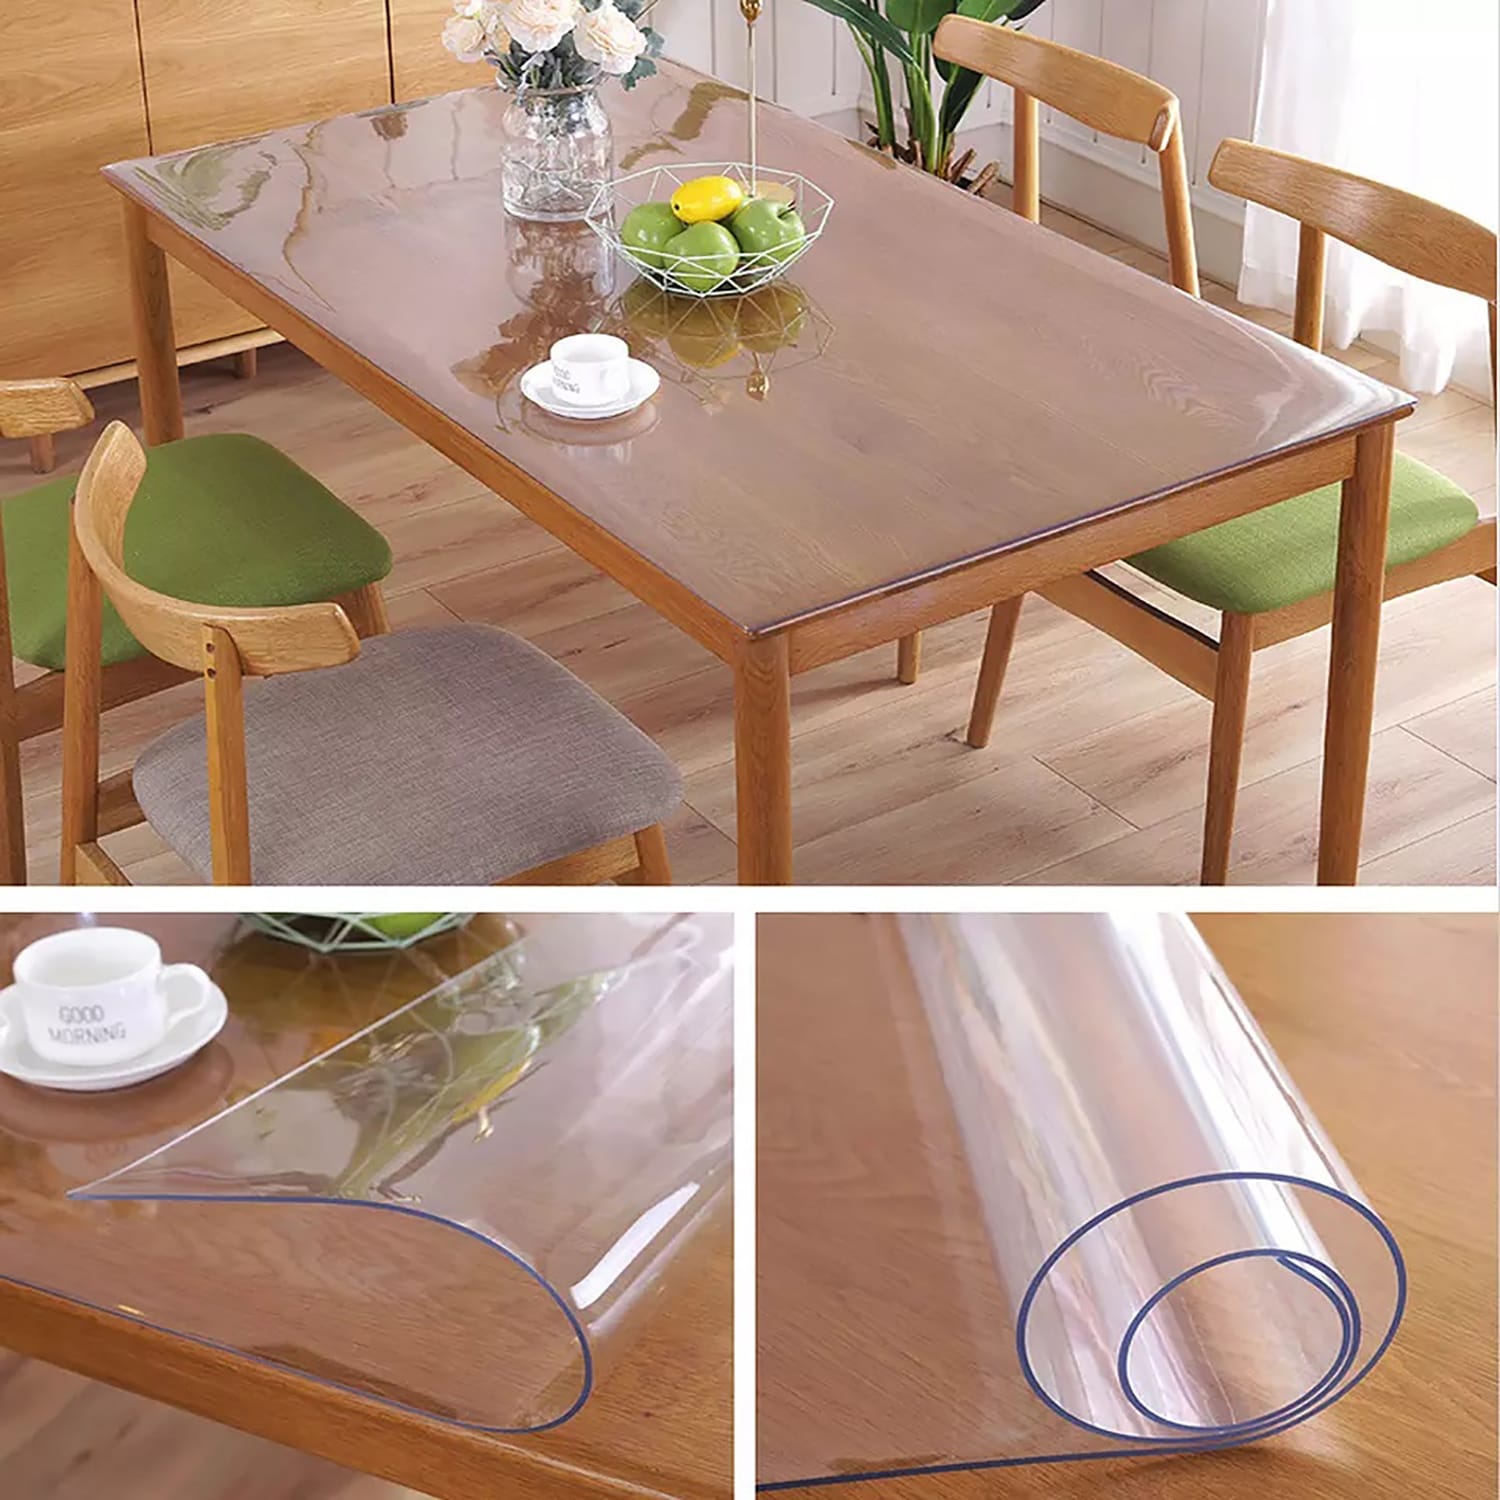 2mm Thick Clear Table Cover 78 x 36 Inch Table Pad Table Protector for  Dining